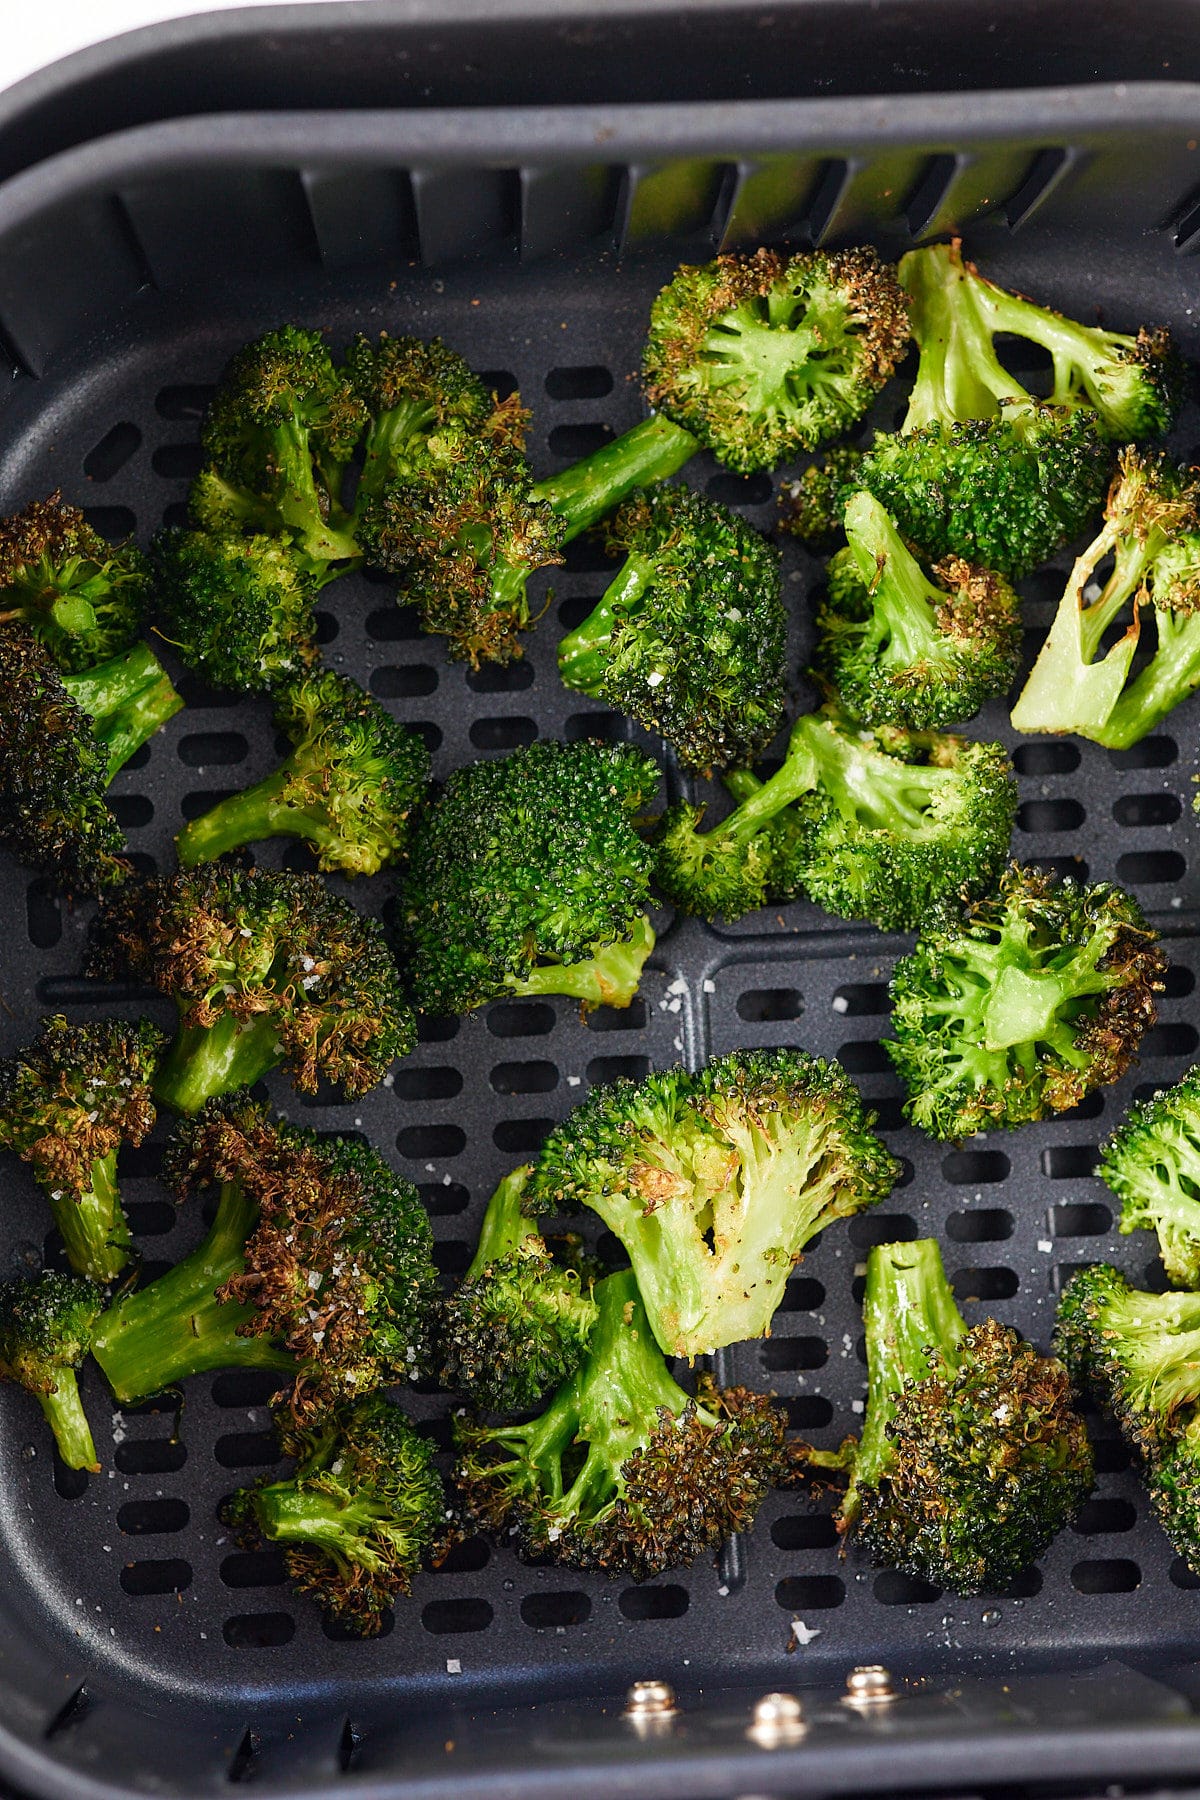 Roasted broccoli in an air fryer basket.